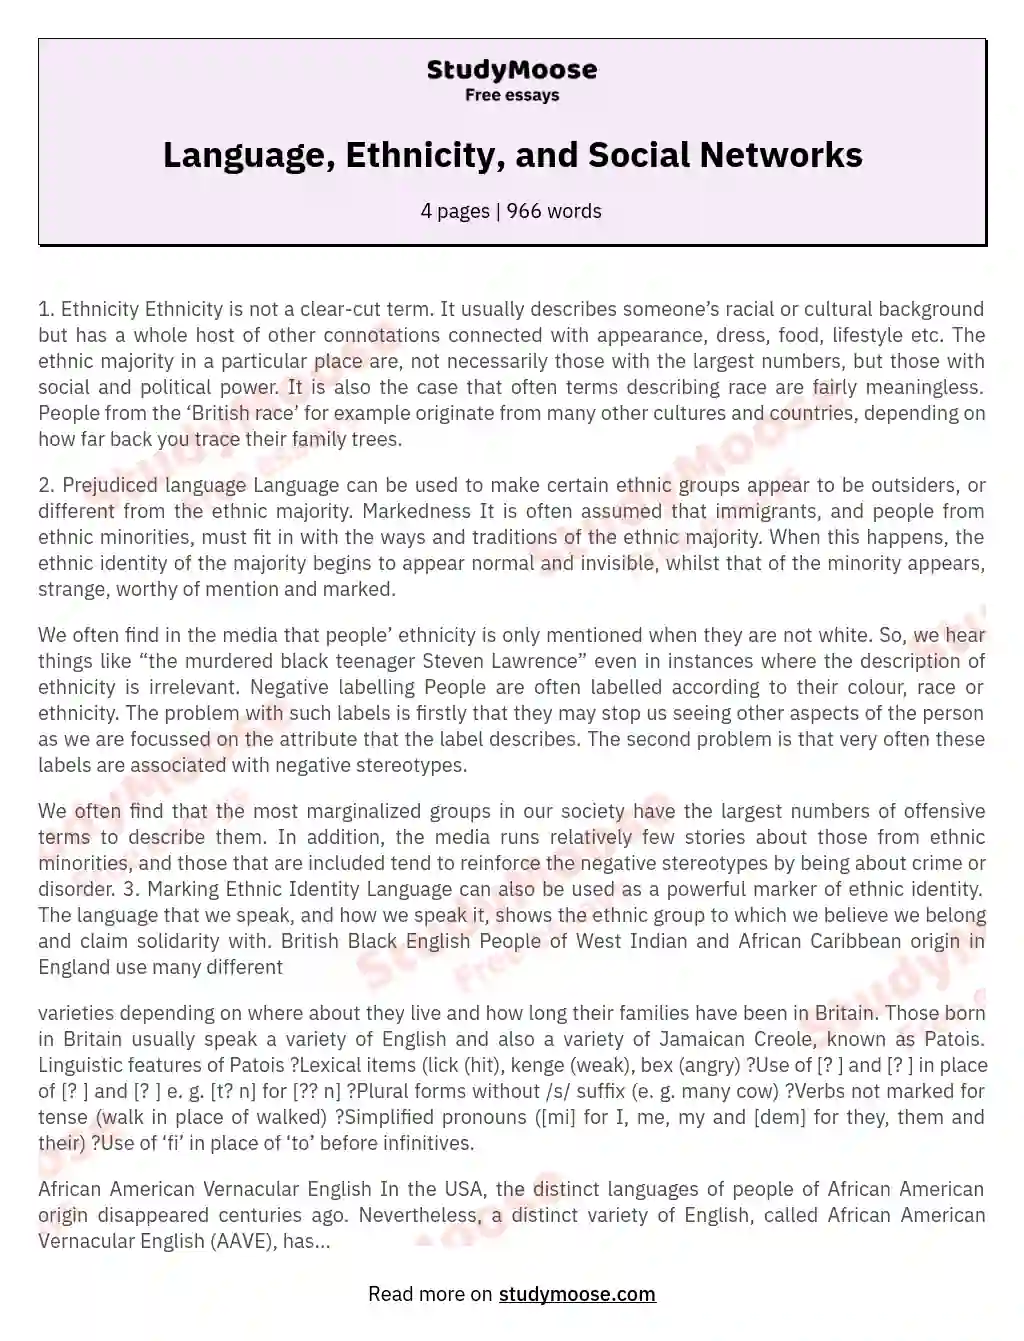 Language, Ethnicity, and Social Networks essay